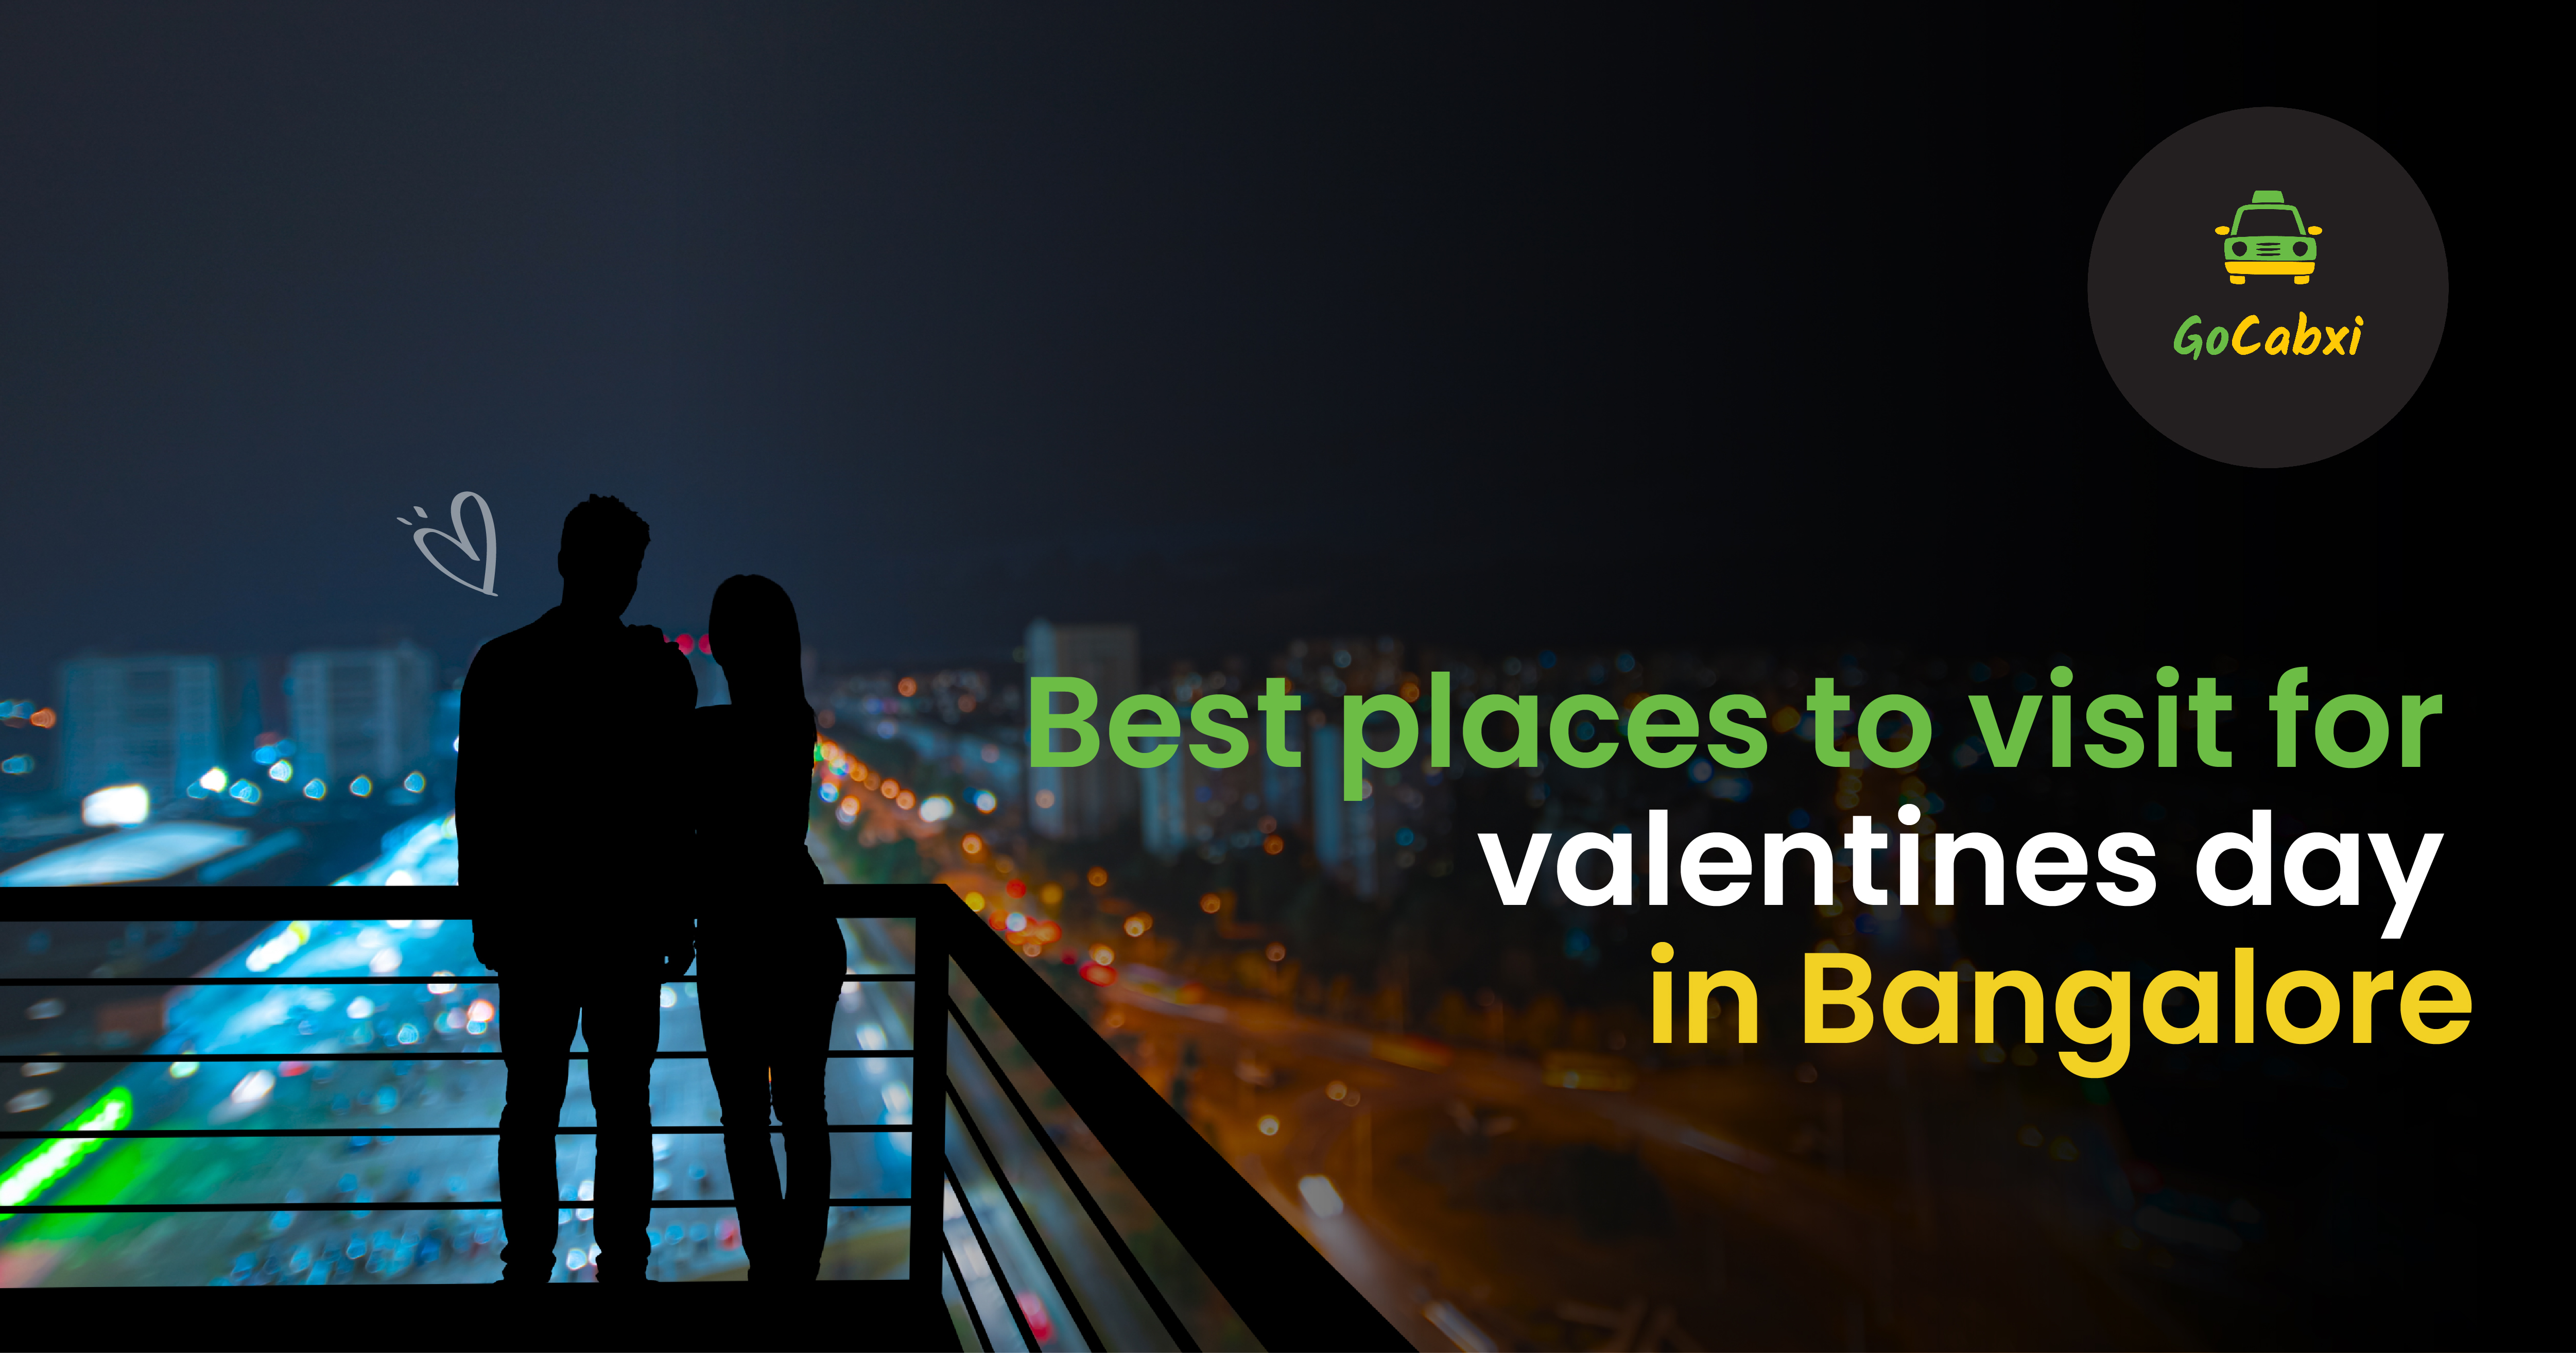 Best places to visit for valentines day in Bangalore